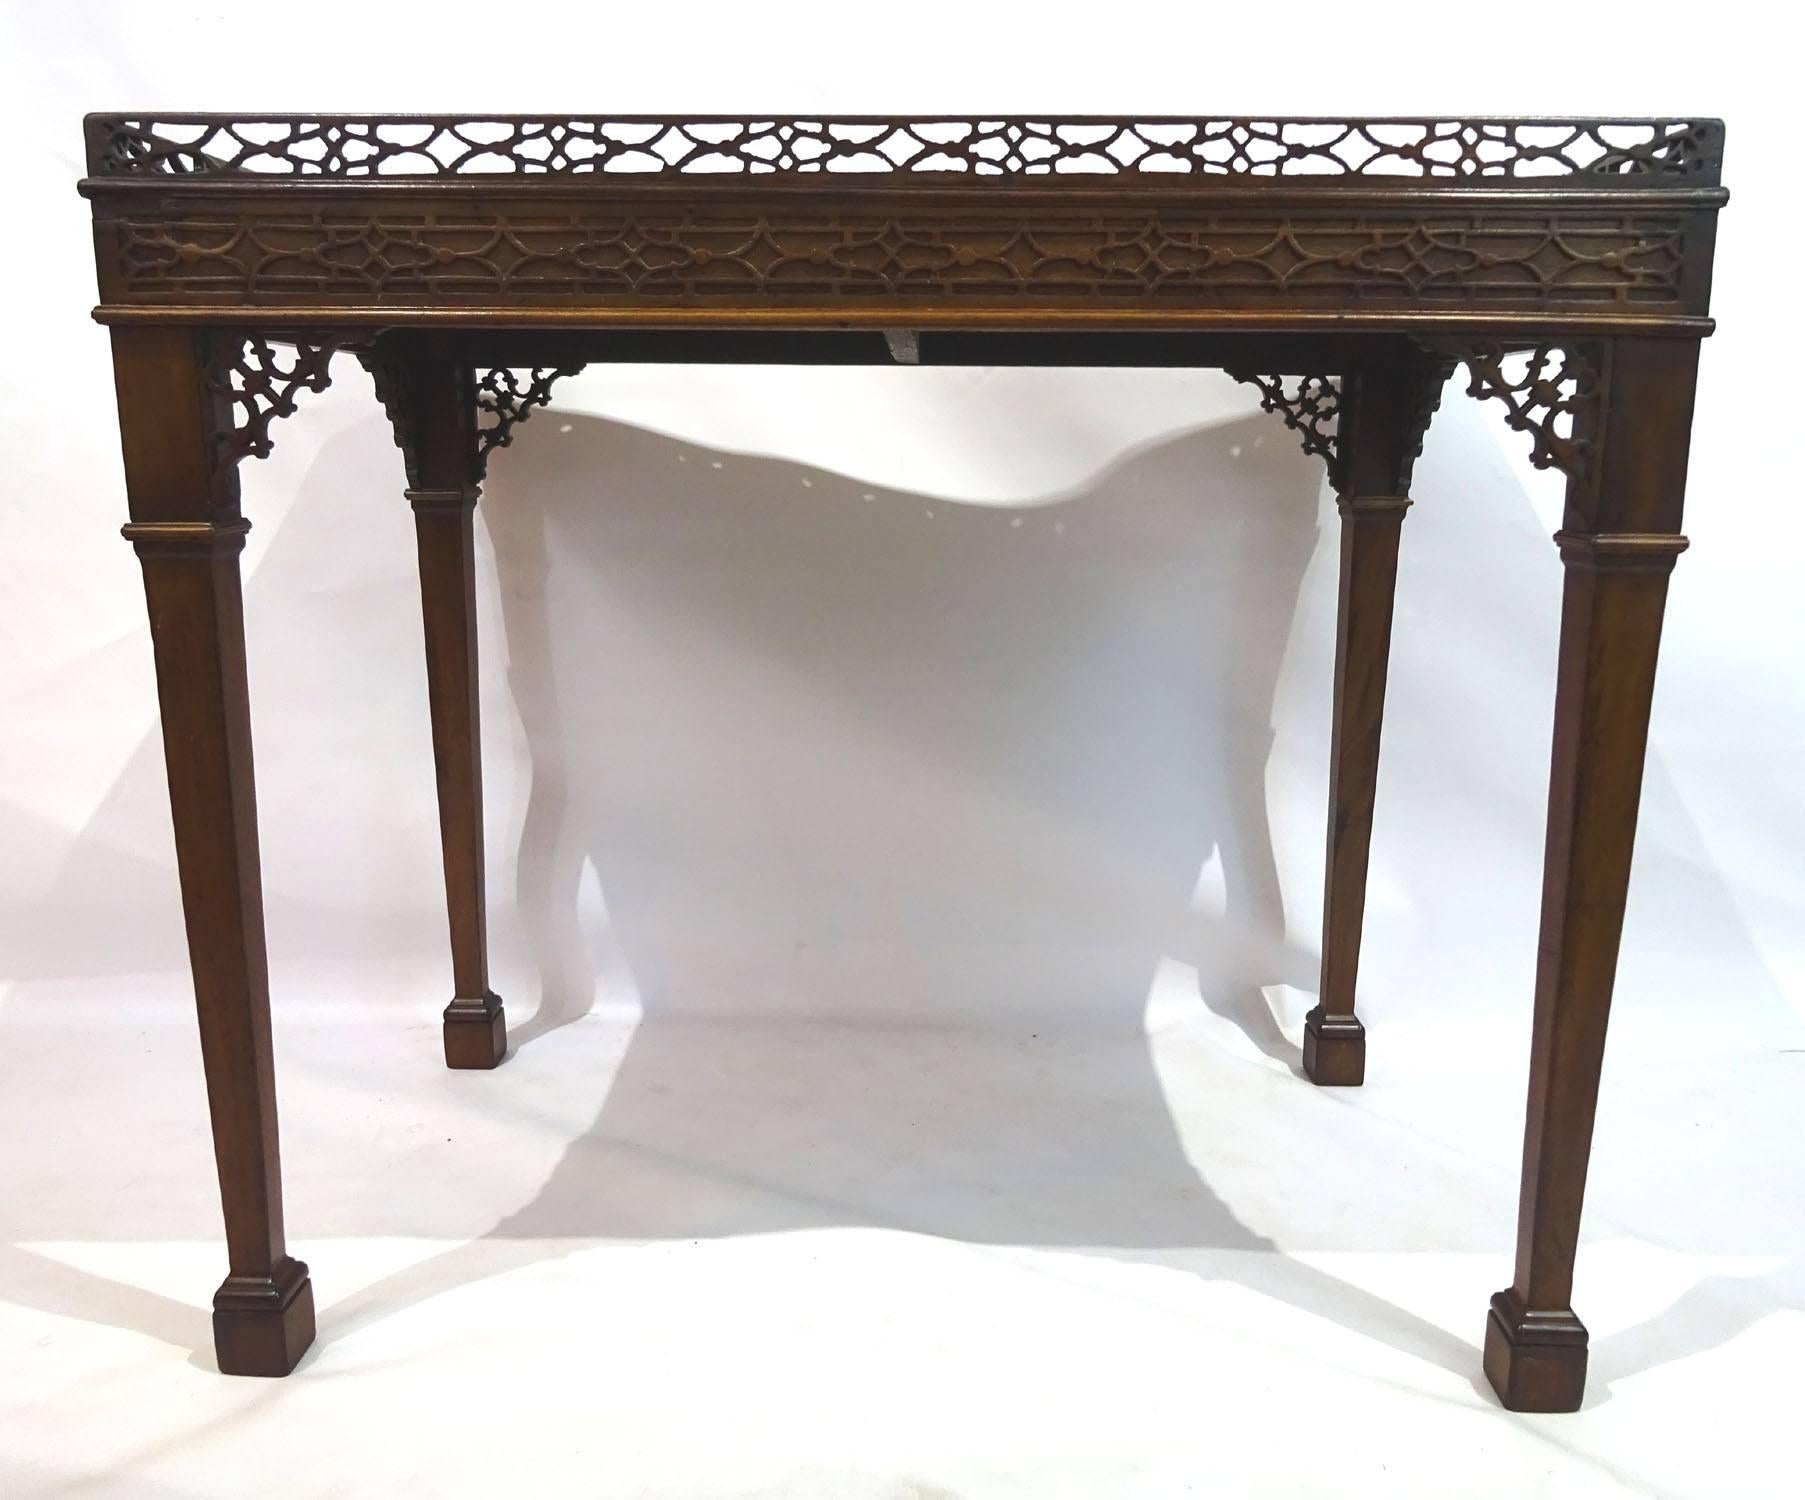 Early 19th century Victorian mahogany rectangular tea table with an open fretwork carved gallery over blind fretwork carved sides, with pull-out slide at each end, standing on four square tapered legs with block feet.